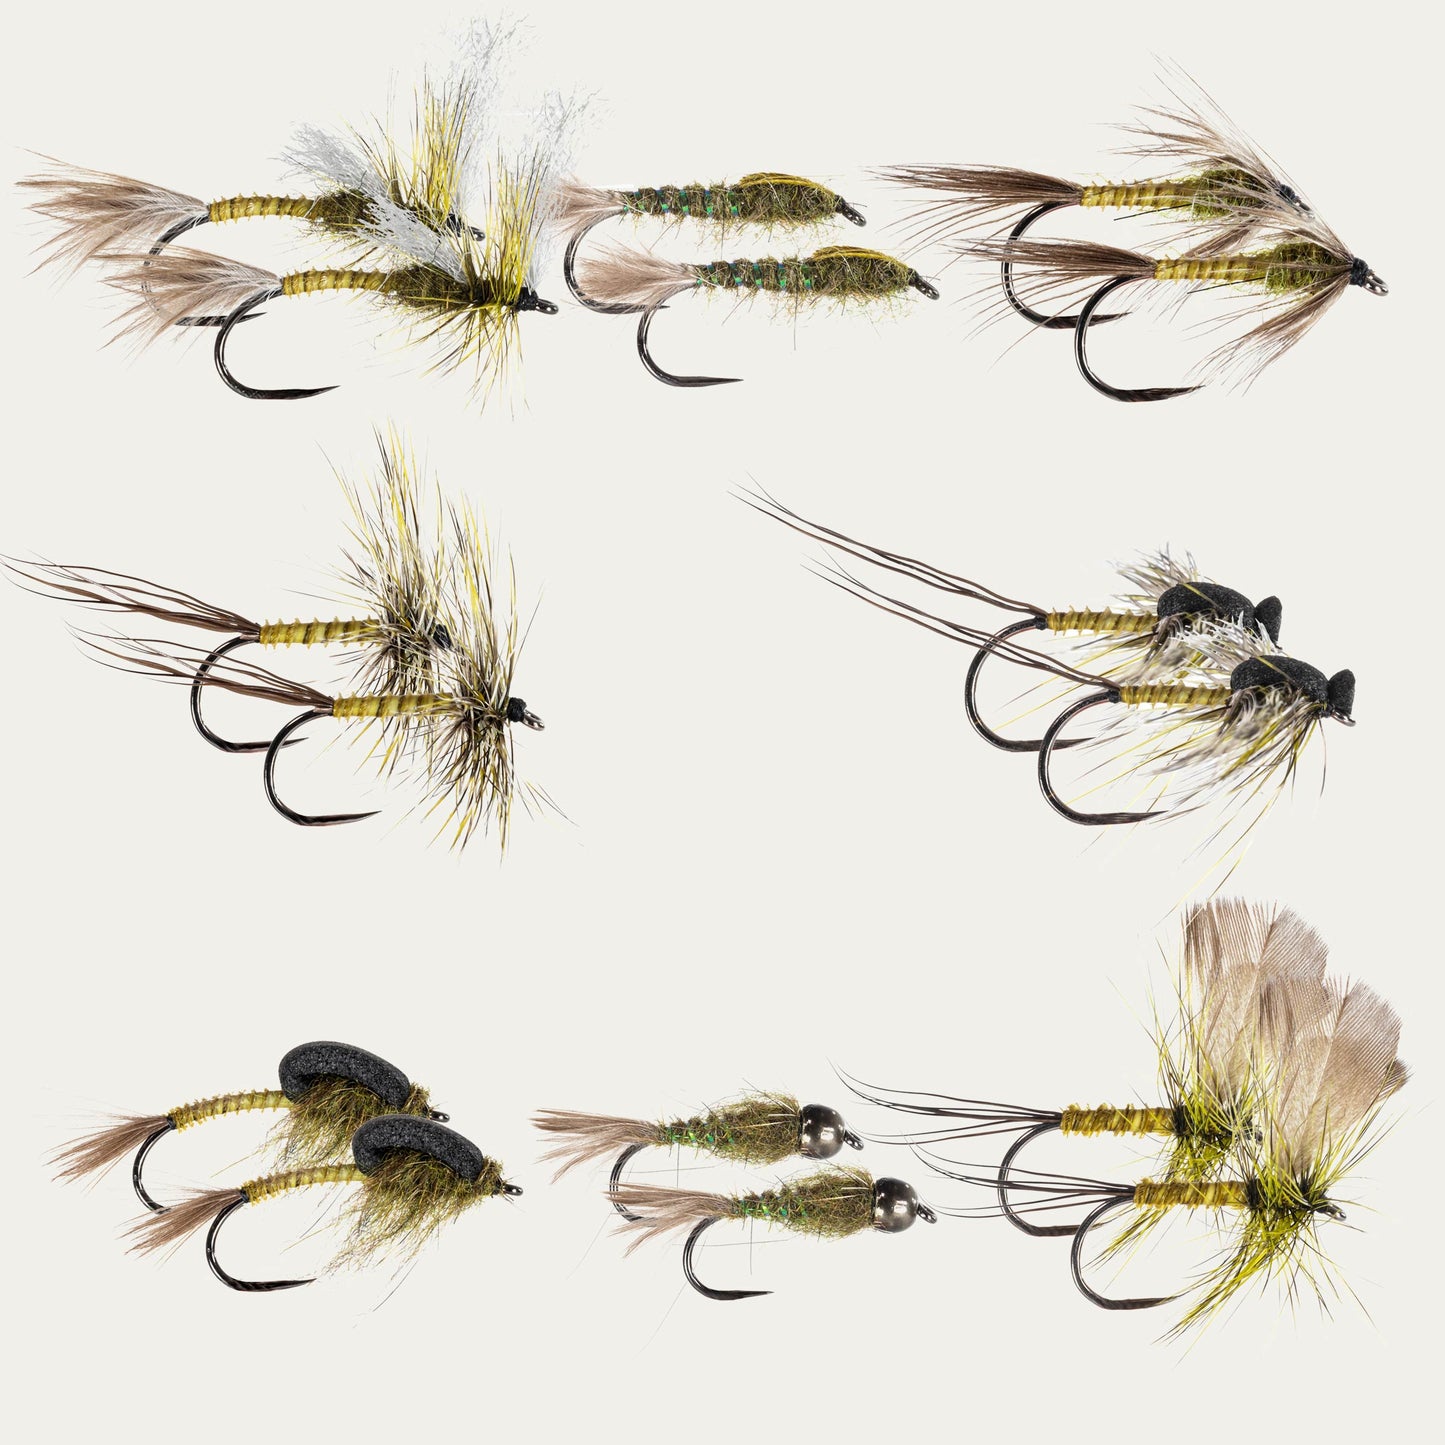 Mighty Green Drake BugCycle Fly Assortment - 16pk, Barbless, Ahrex